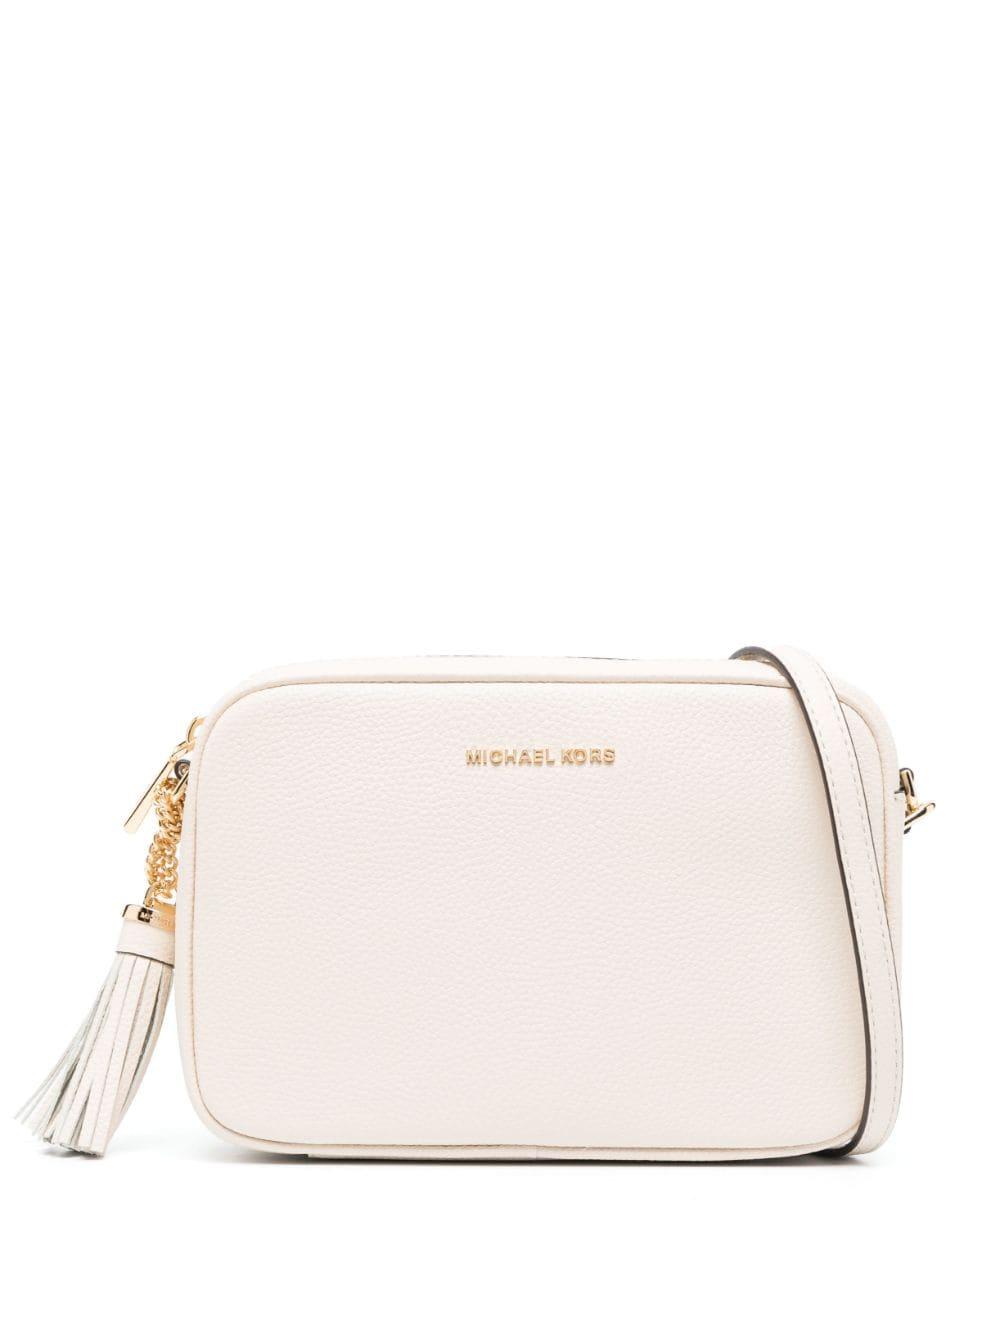 Michael Kors Ginny Leather Crossbody Bag in Natural | Lyst